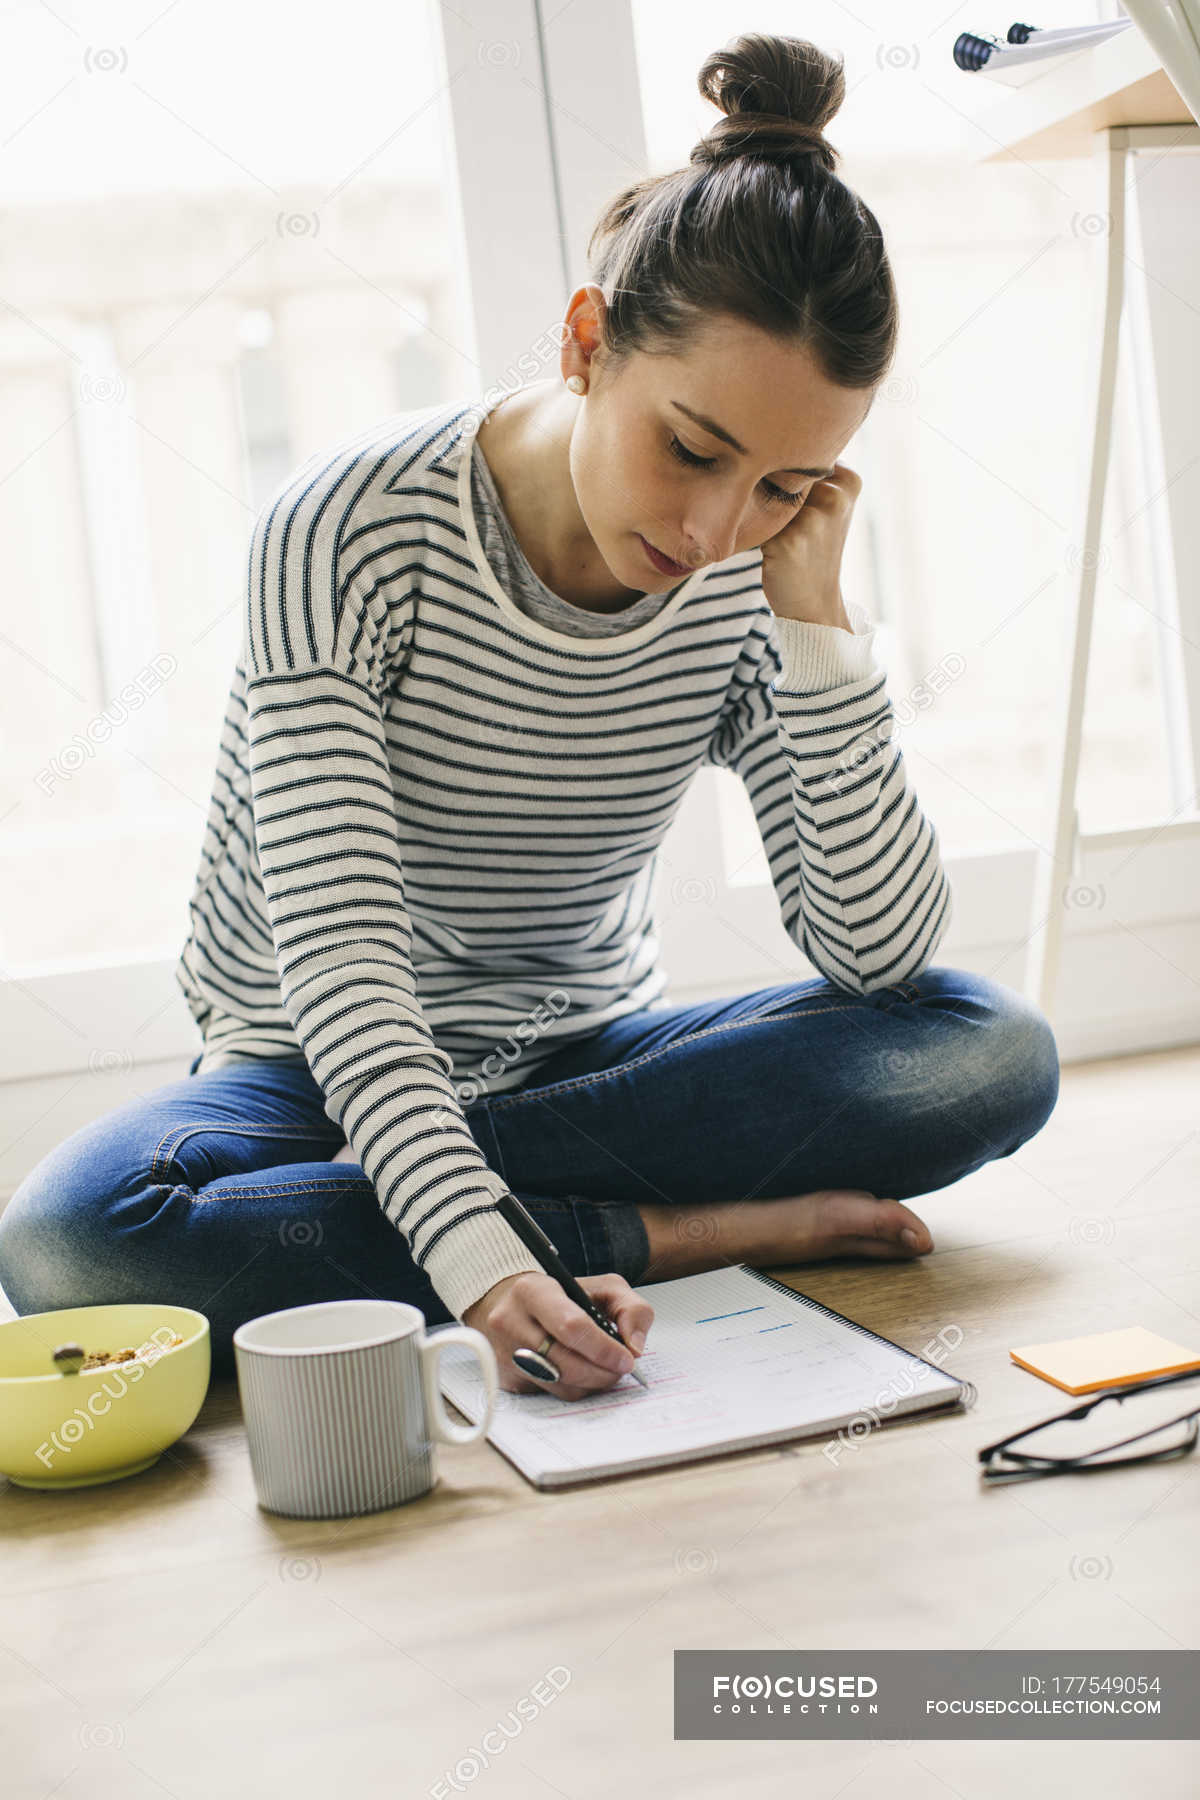 Woman Sitting On Floor And Writing On Notepad Brown Hair Coffee